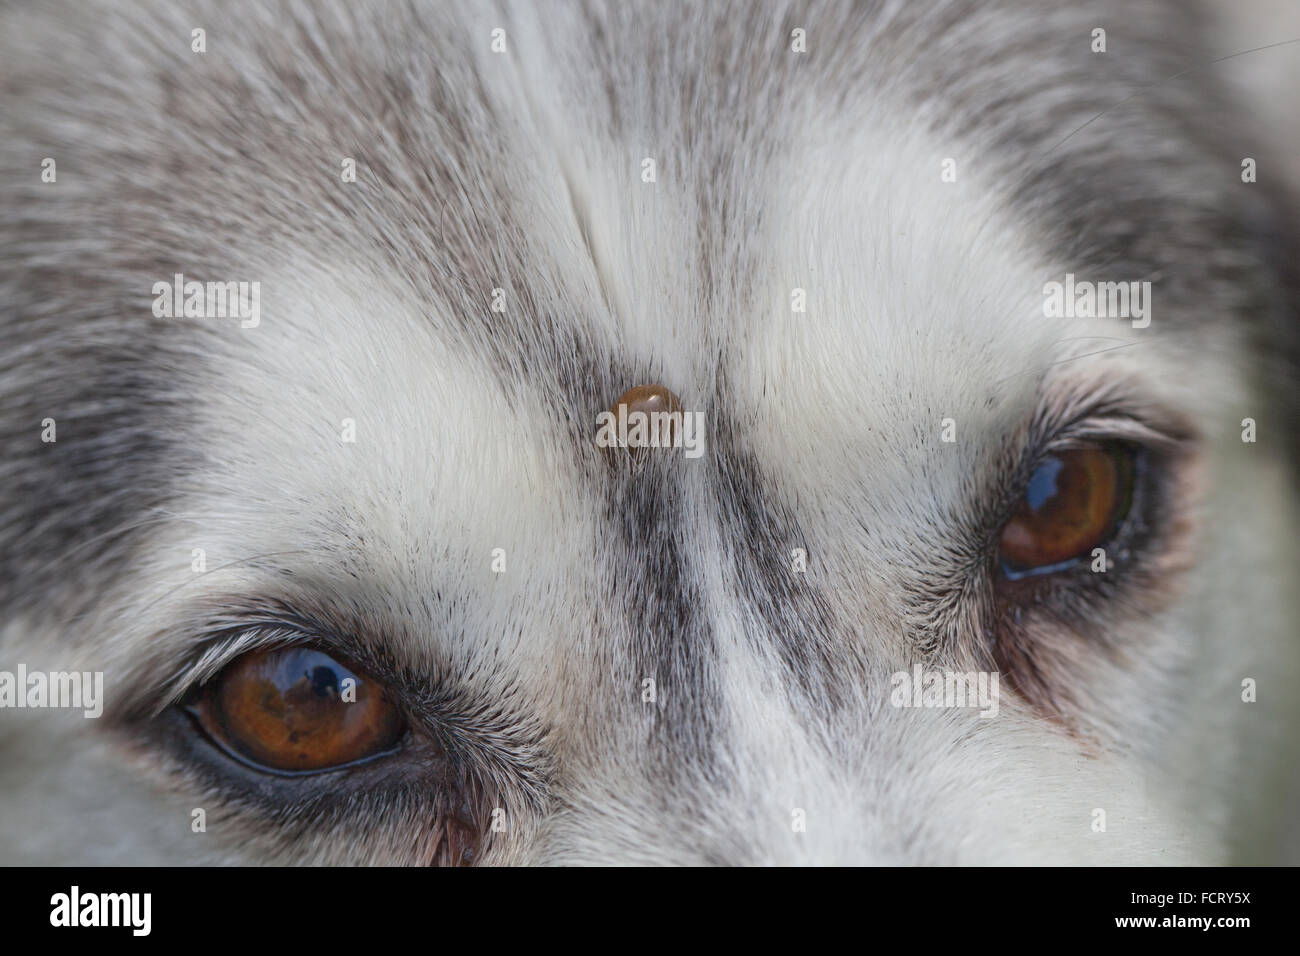 Siberian Husky. Dog. Canis lupus familiaris. Forehead. Note tick, Ixodes ricinus, embedded on forehead between eyes. Stock Photo